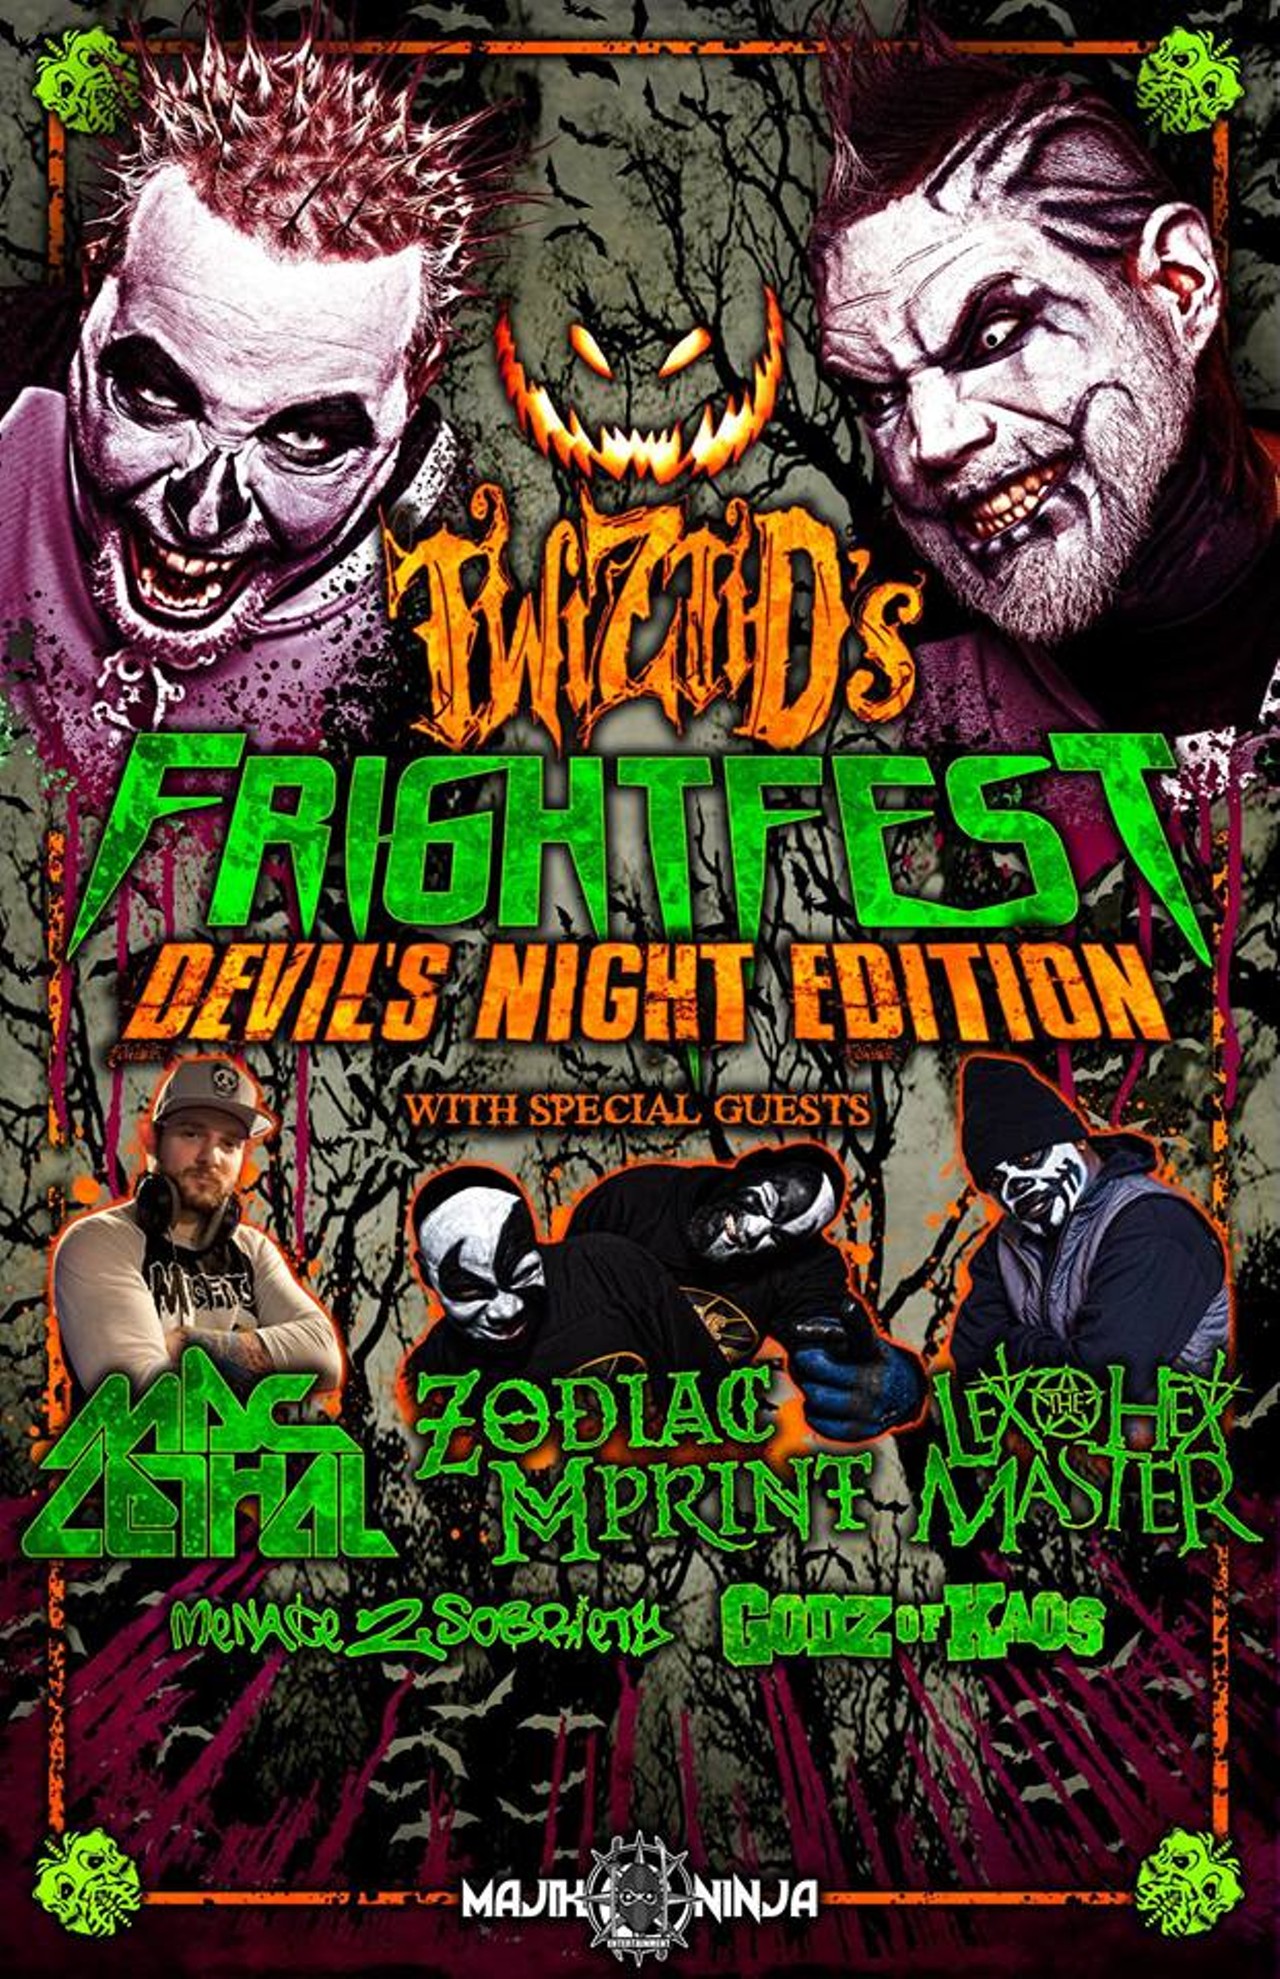 Oct. 30
Twiztid&#146;s Frightfest Devil&#146;s Night Edition
@ Majestic Theatre
Unfazed by the creepy clown epidemic that&#146;s sweeping the nation? Really wishing you could see something sorta like ICP? Twiztid&#146;s Frightfest Devil&#146;s Night Edition is the answer for you. Yeah, you&#146;ll definitely get to see Twiztid, but you&#146;ll also get to see Mac Lethal, Zodiac Mprint, and Lex the Hex Master. You need to get your ticket if you haven&#146;t yet.
4140 Woodward Ave., Detroit; 313-833-9700, majesticdetroit.com